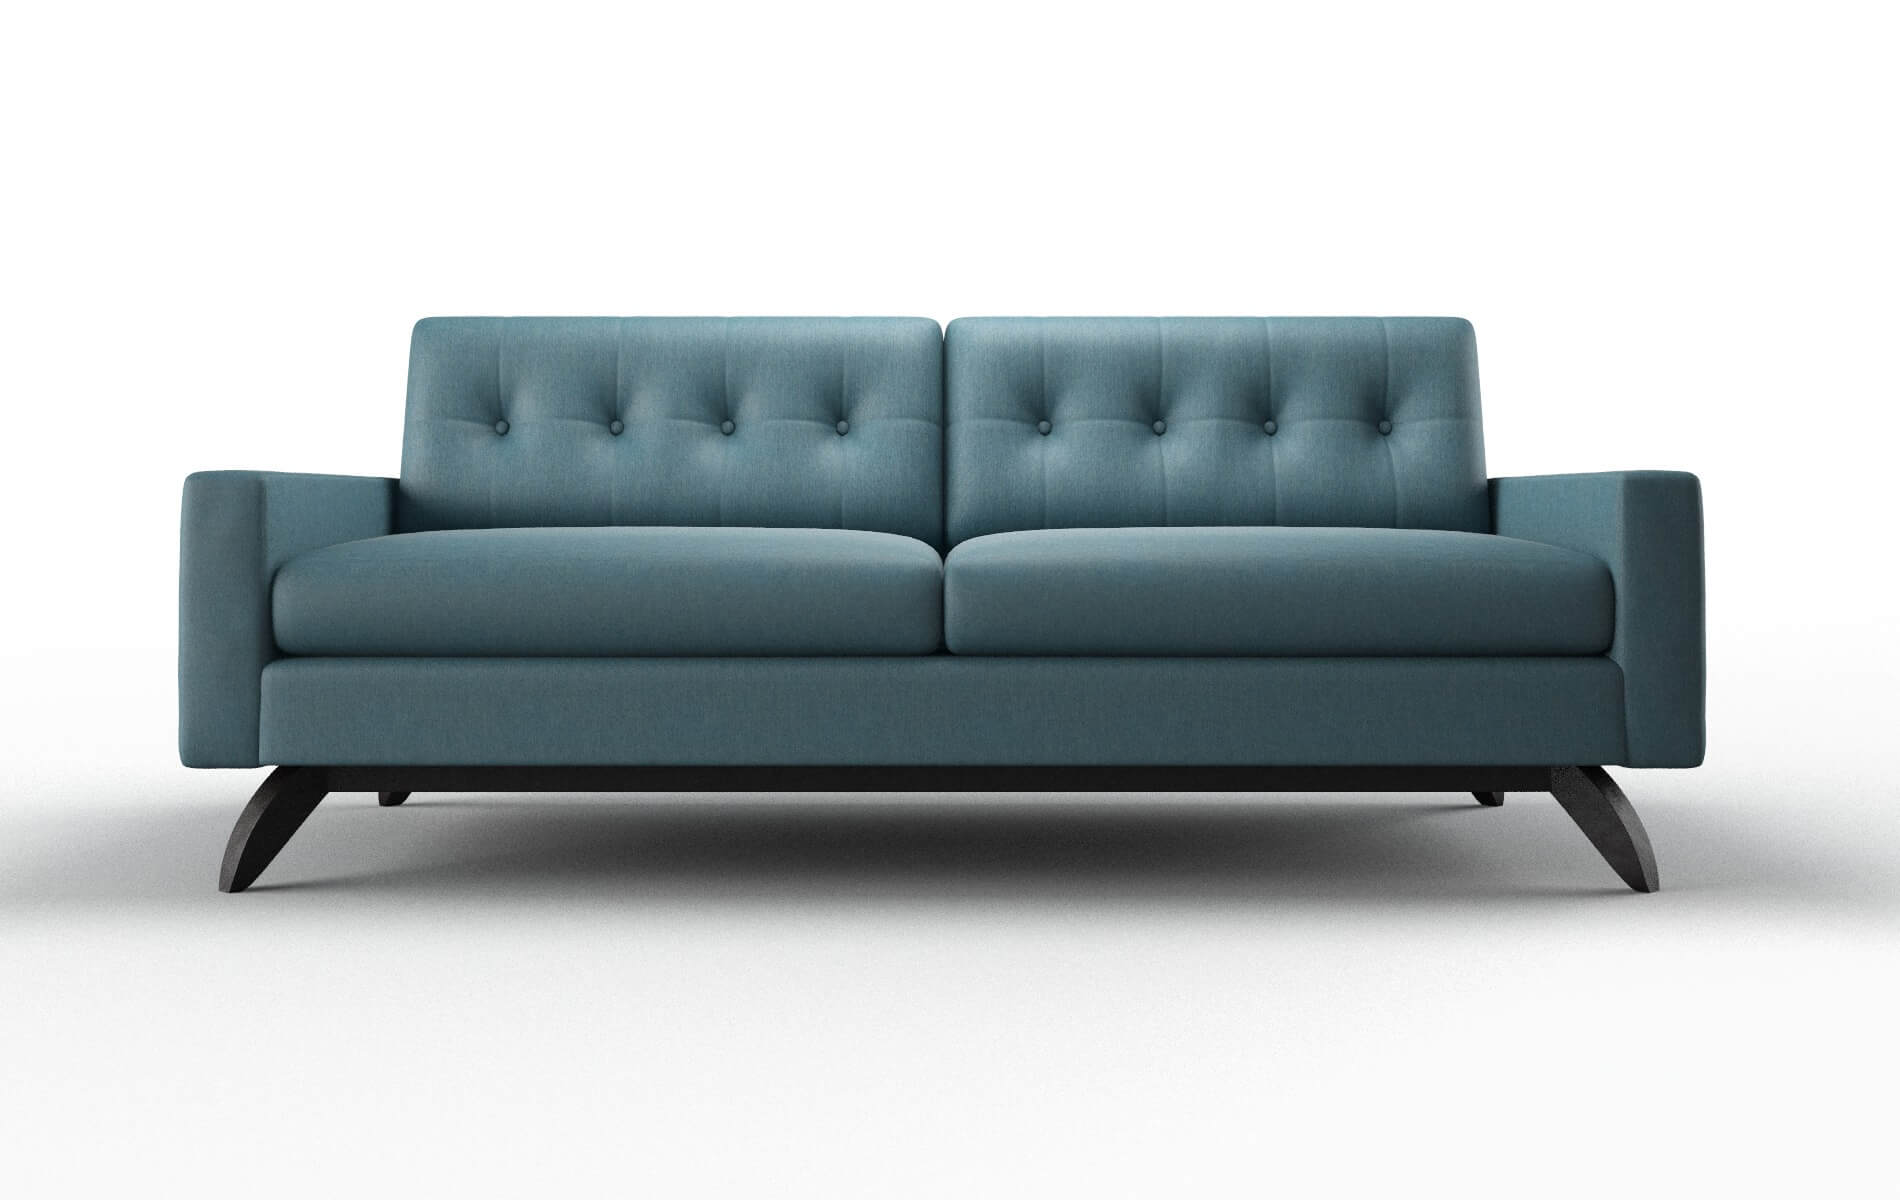 Milan Cosmo Teal chair espresso legs